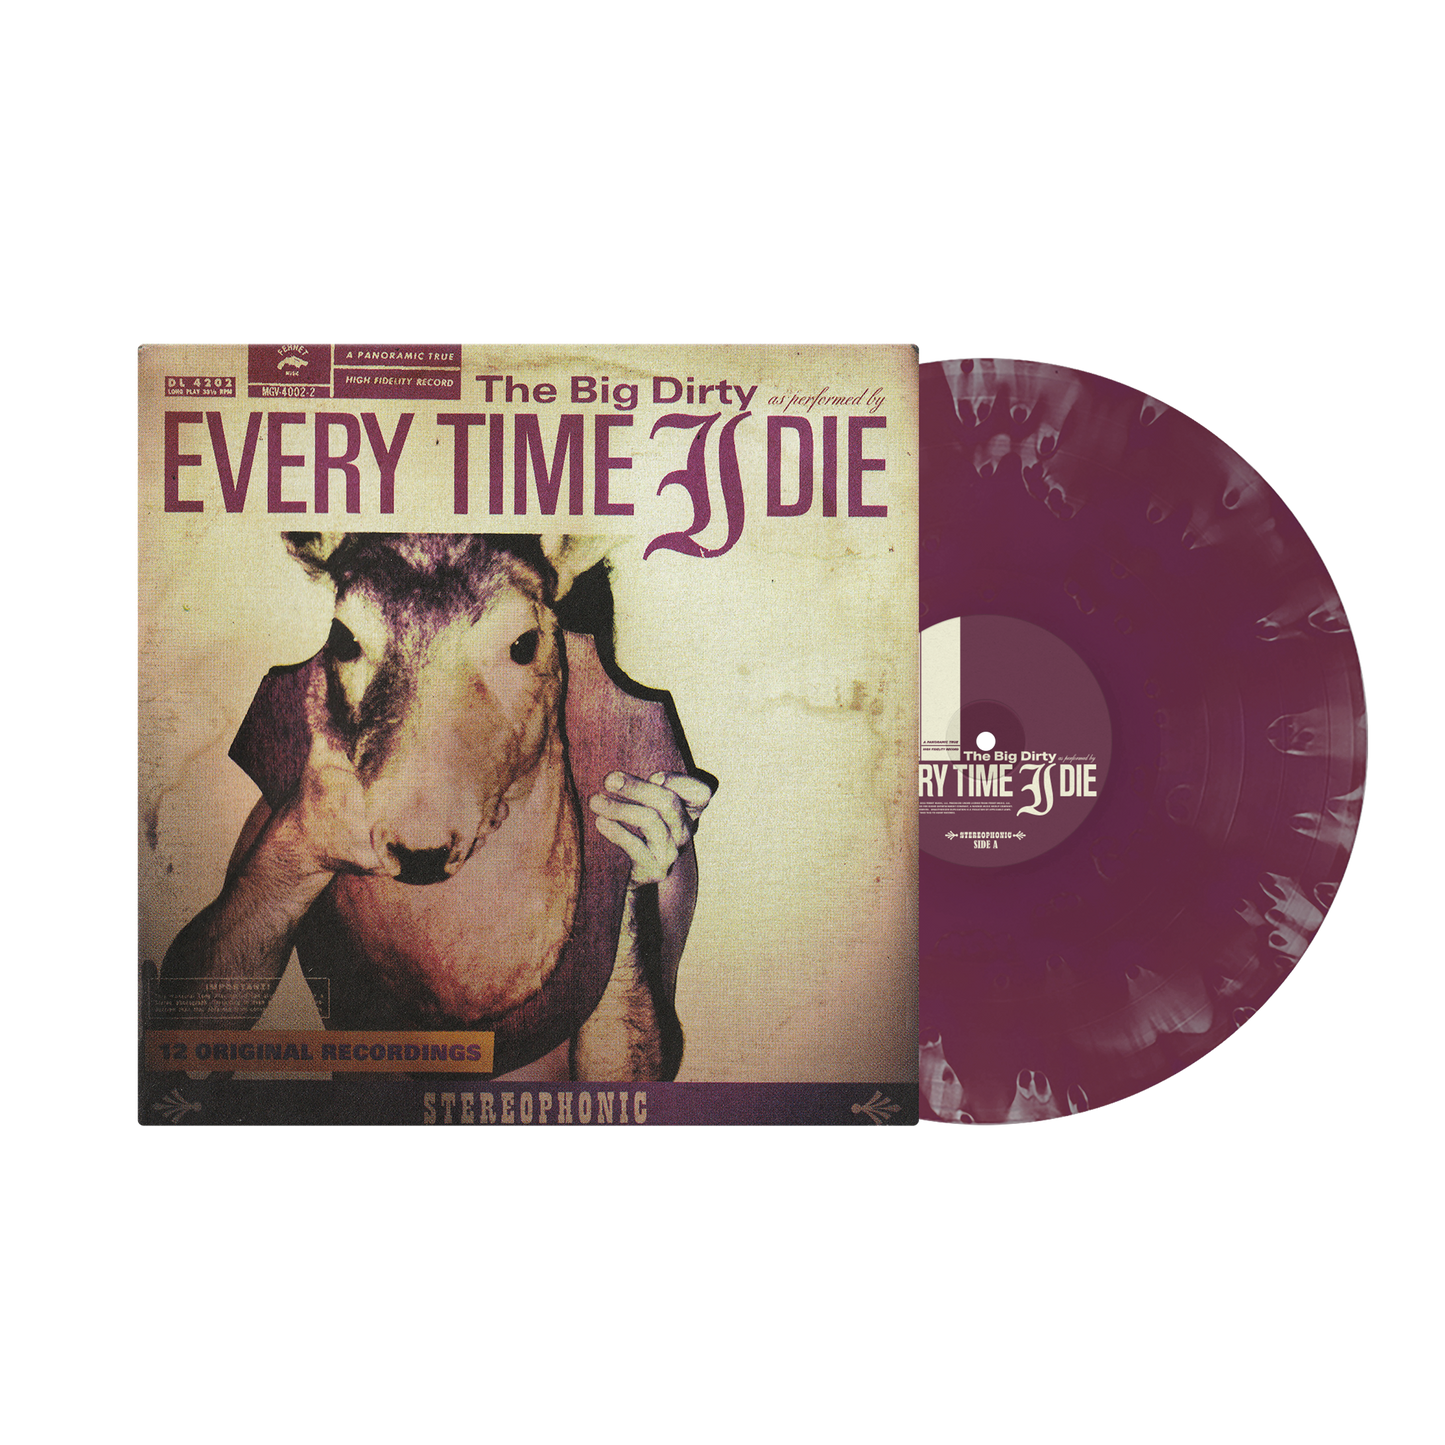 Every Time I Die - "The Big Dirty"